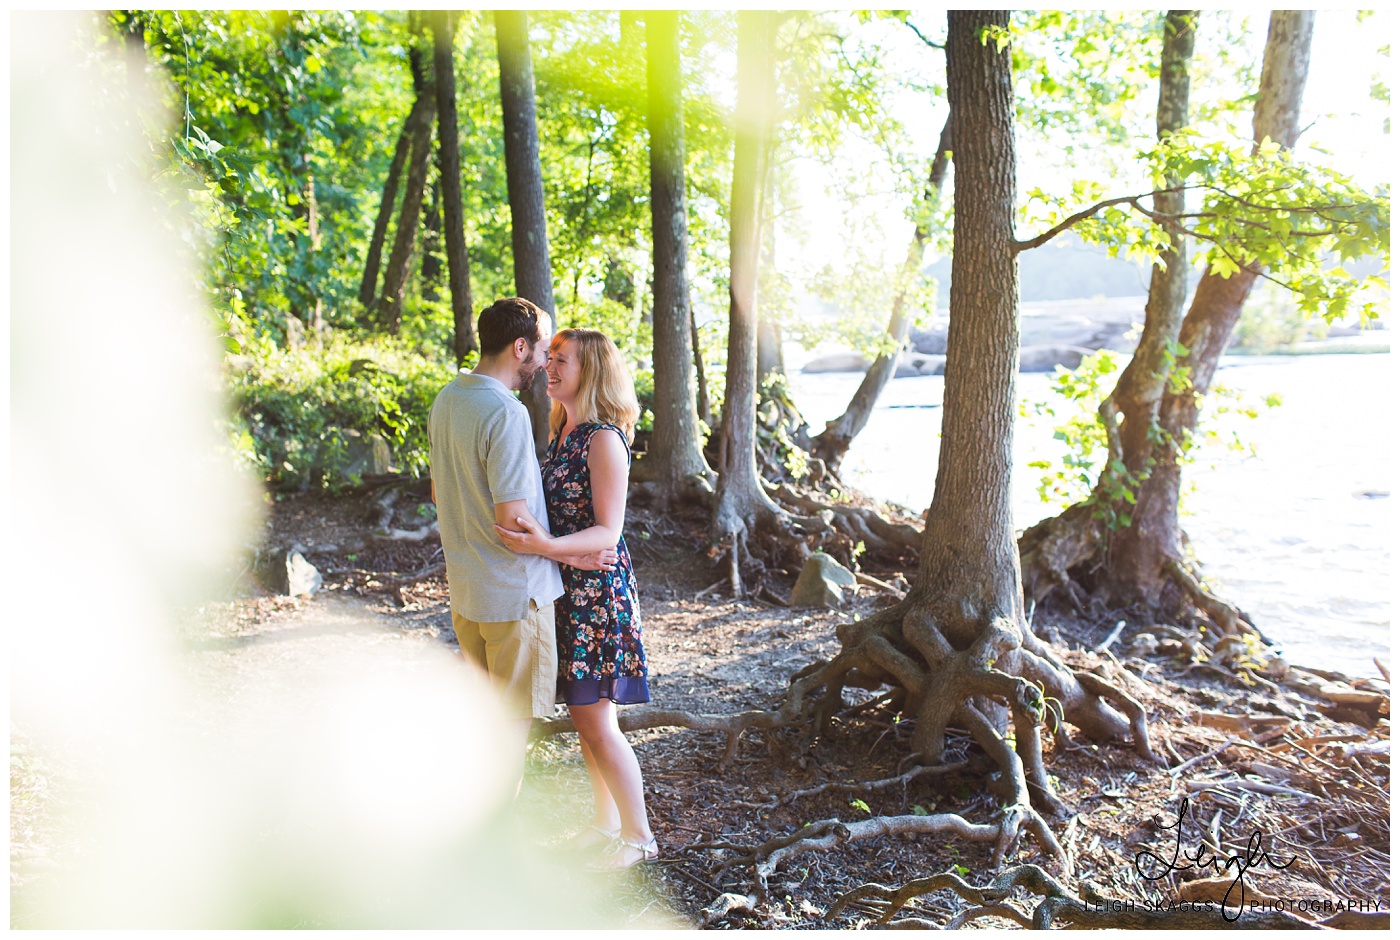 Belle Isle engagement session in Richmond Virginia!